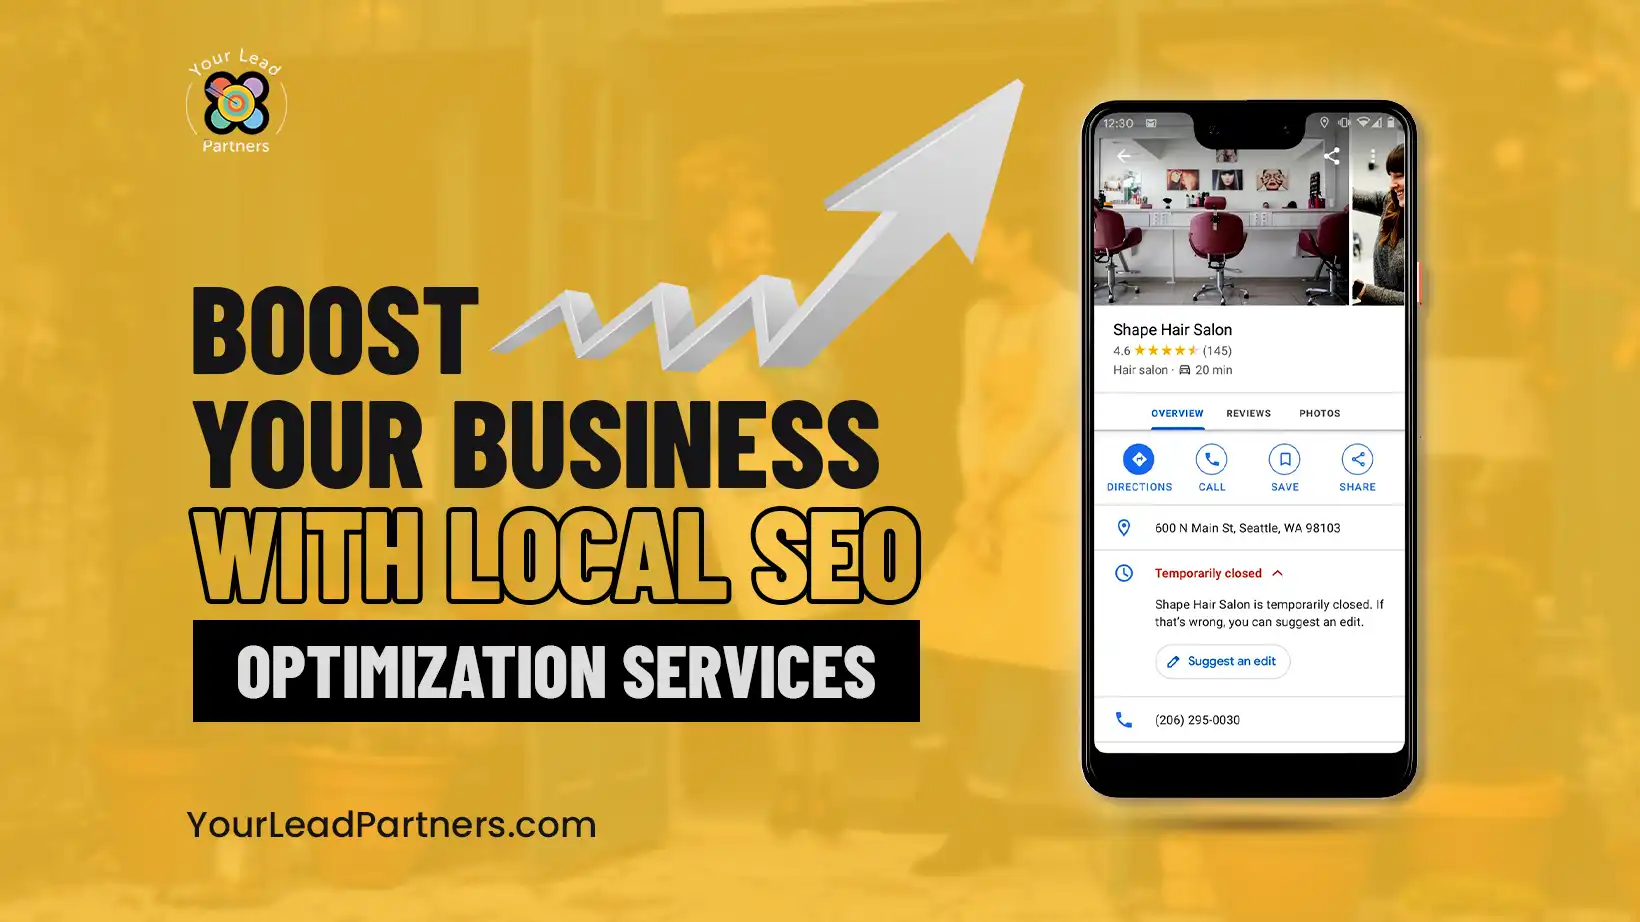 Boost Your Business with Local SEO Optimization Services